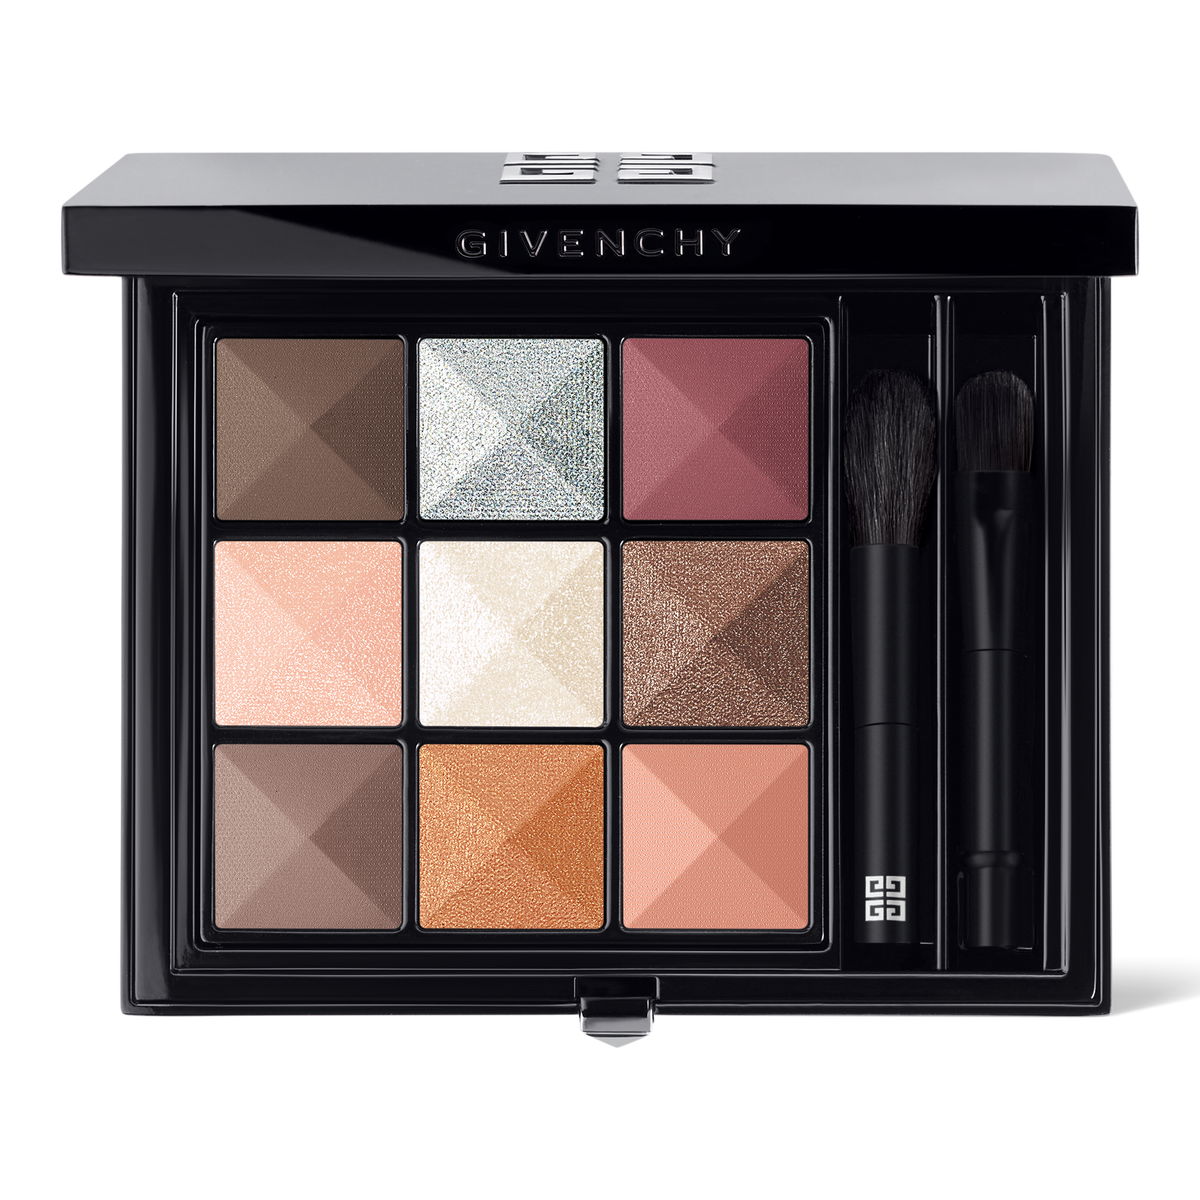 LE 9 DE GIVENCHY • THE COUTURE EYE PALETTE WITH 9 COLORS ∷ GIVENCHY